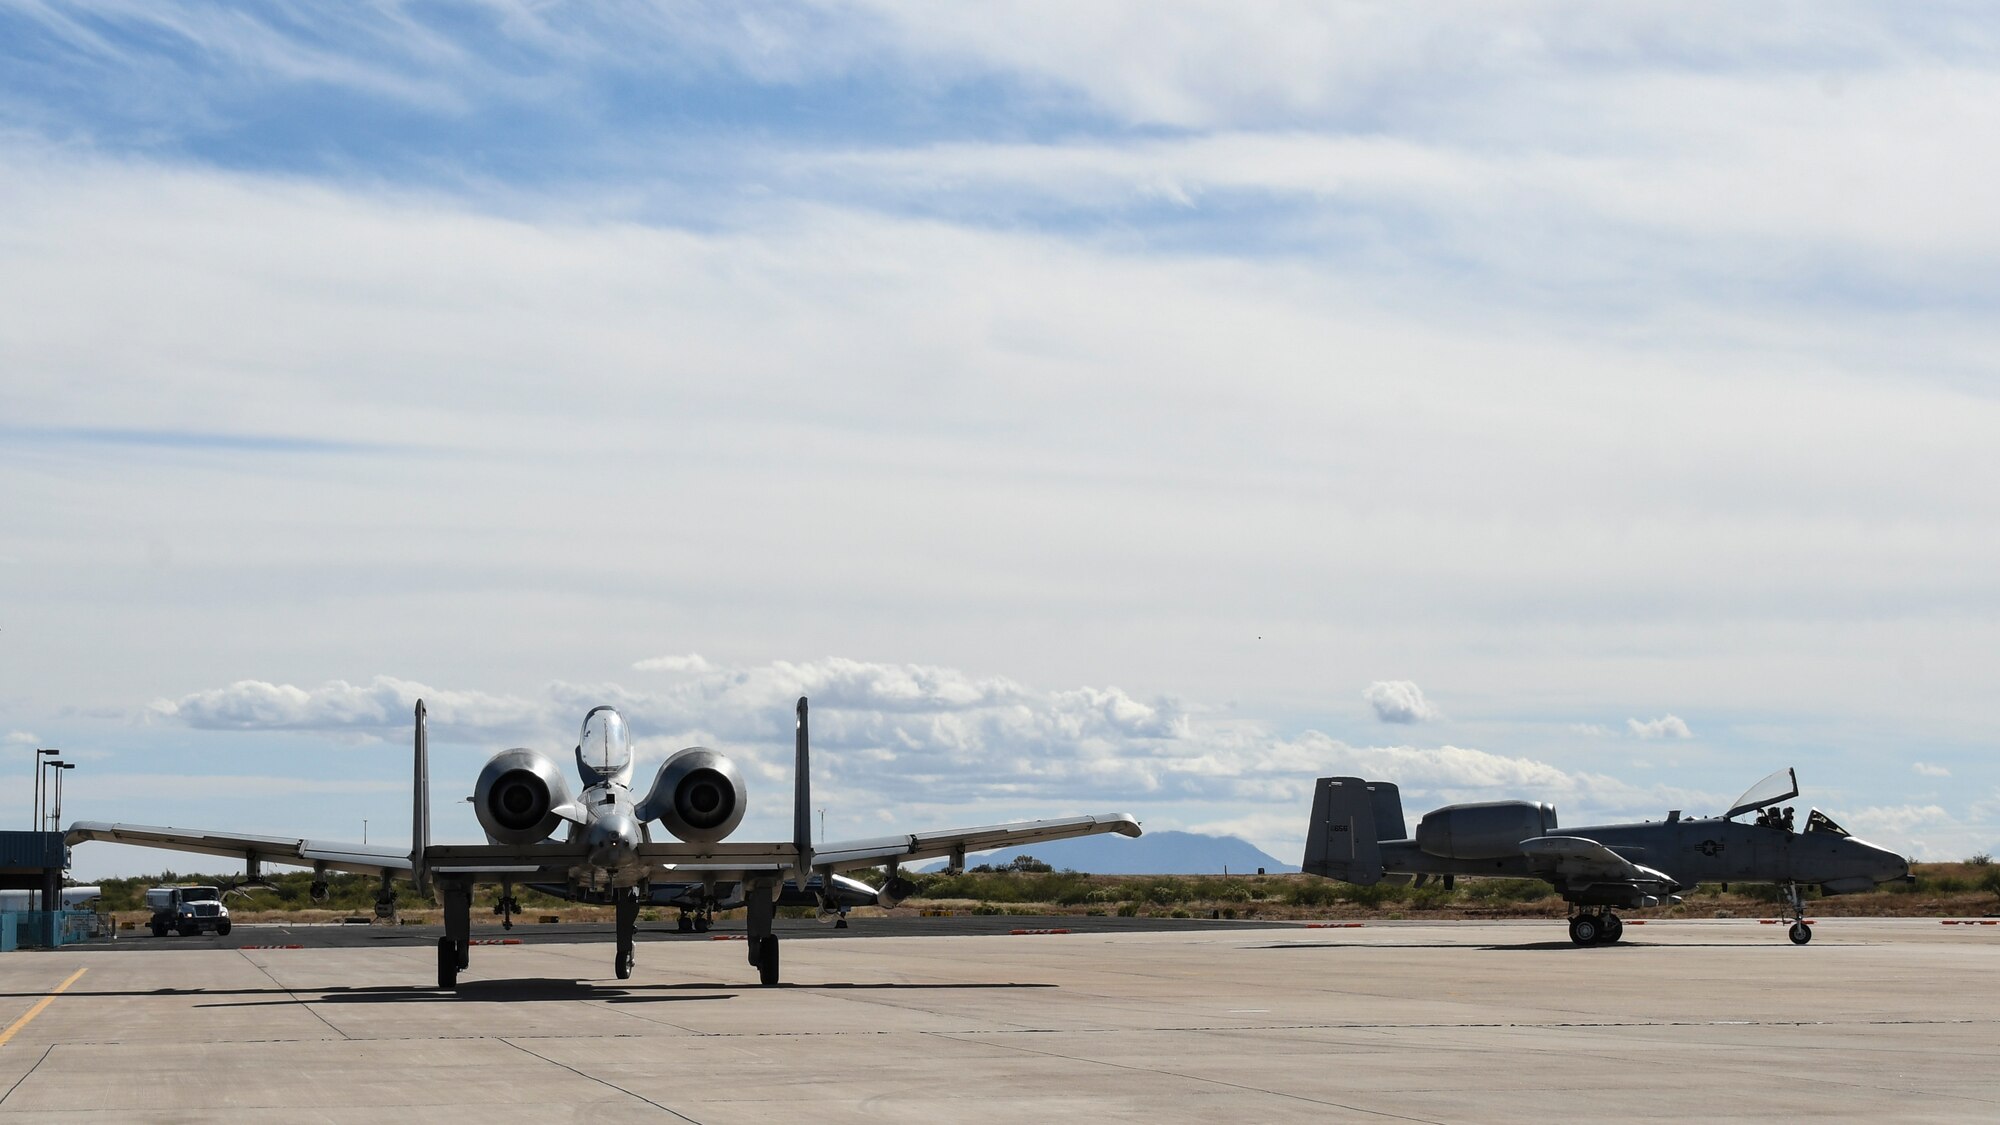 A photo of two A-10s taxiing on the runway.